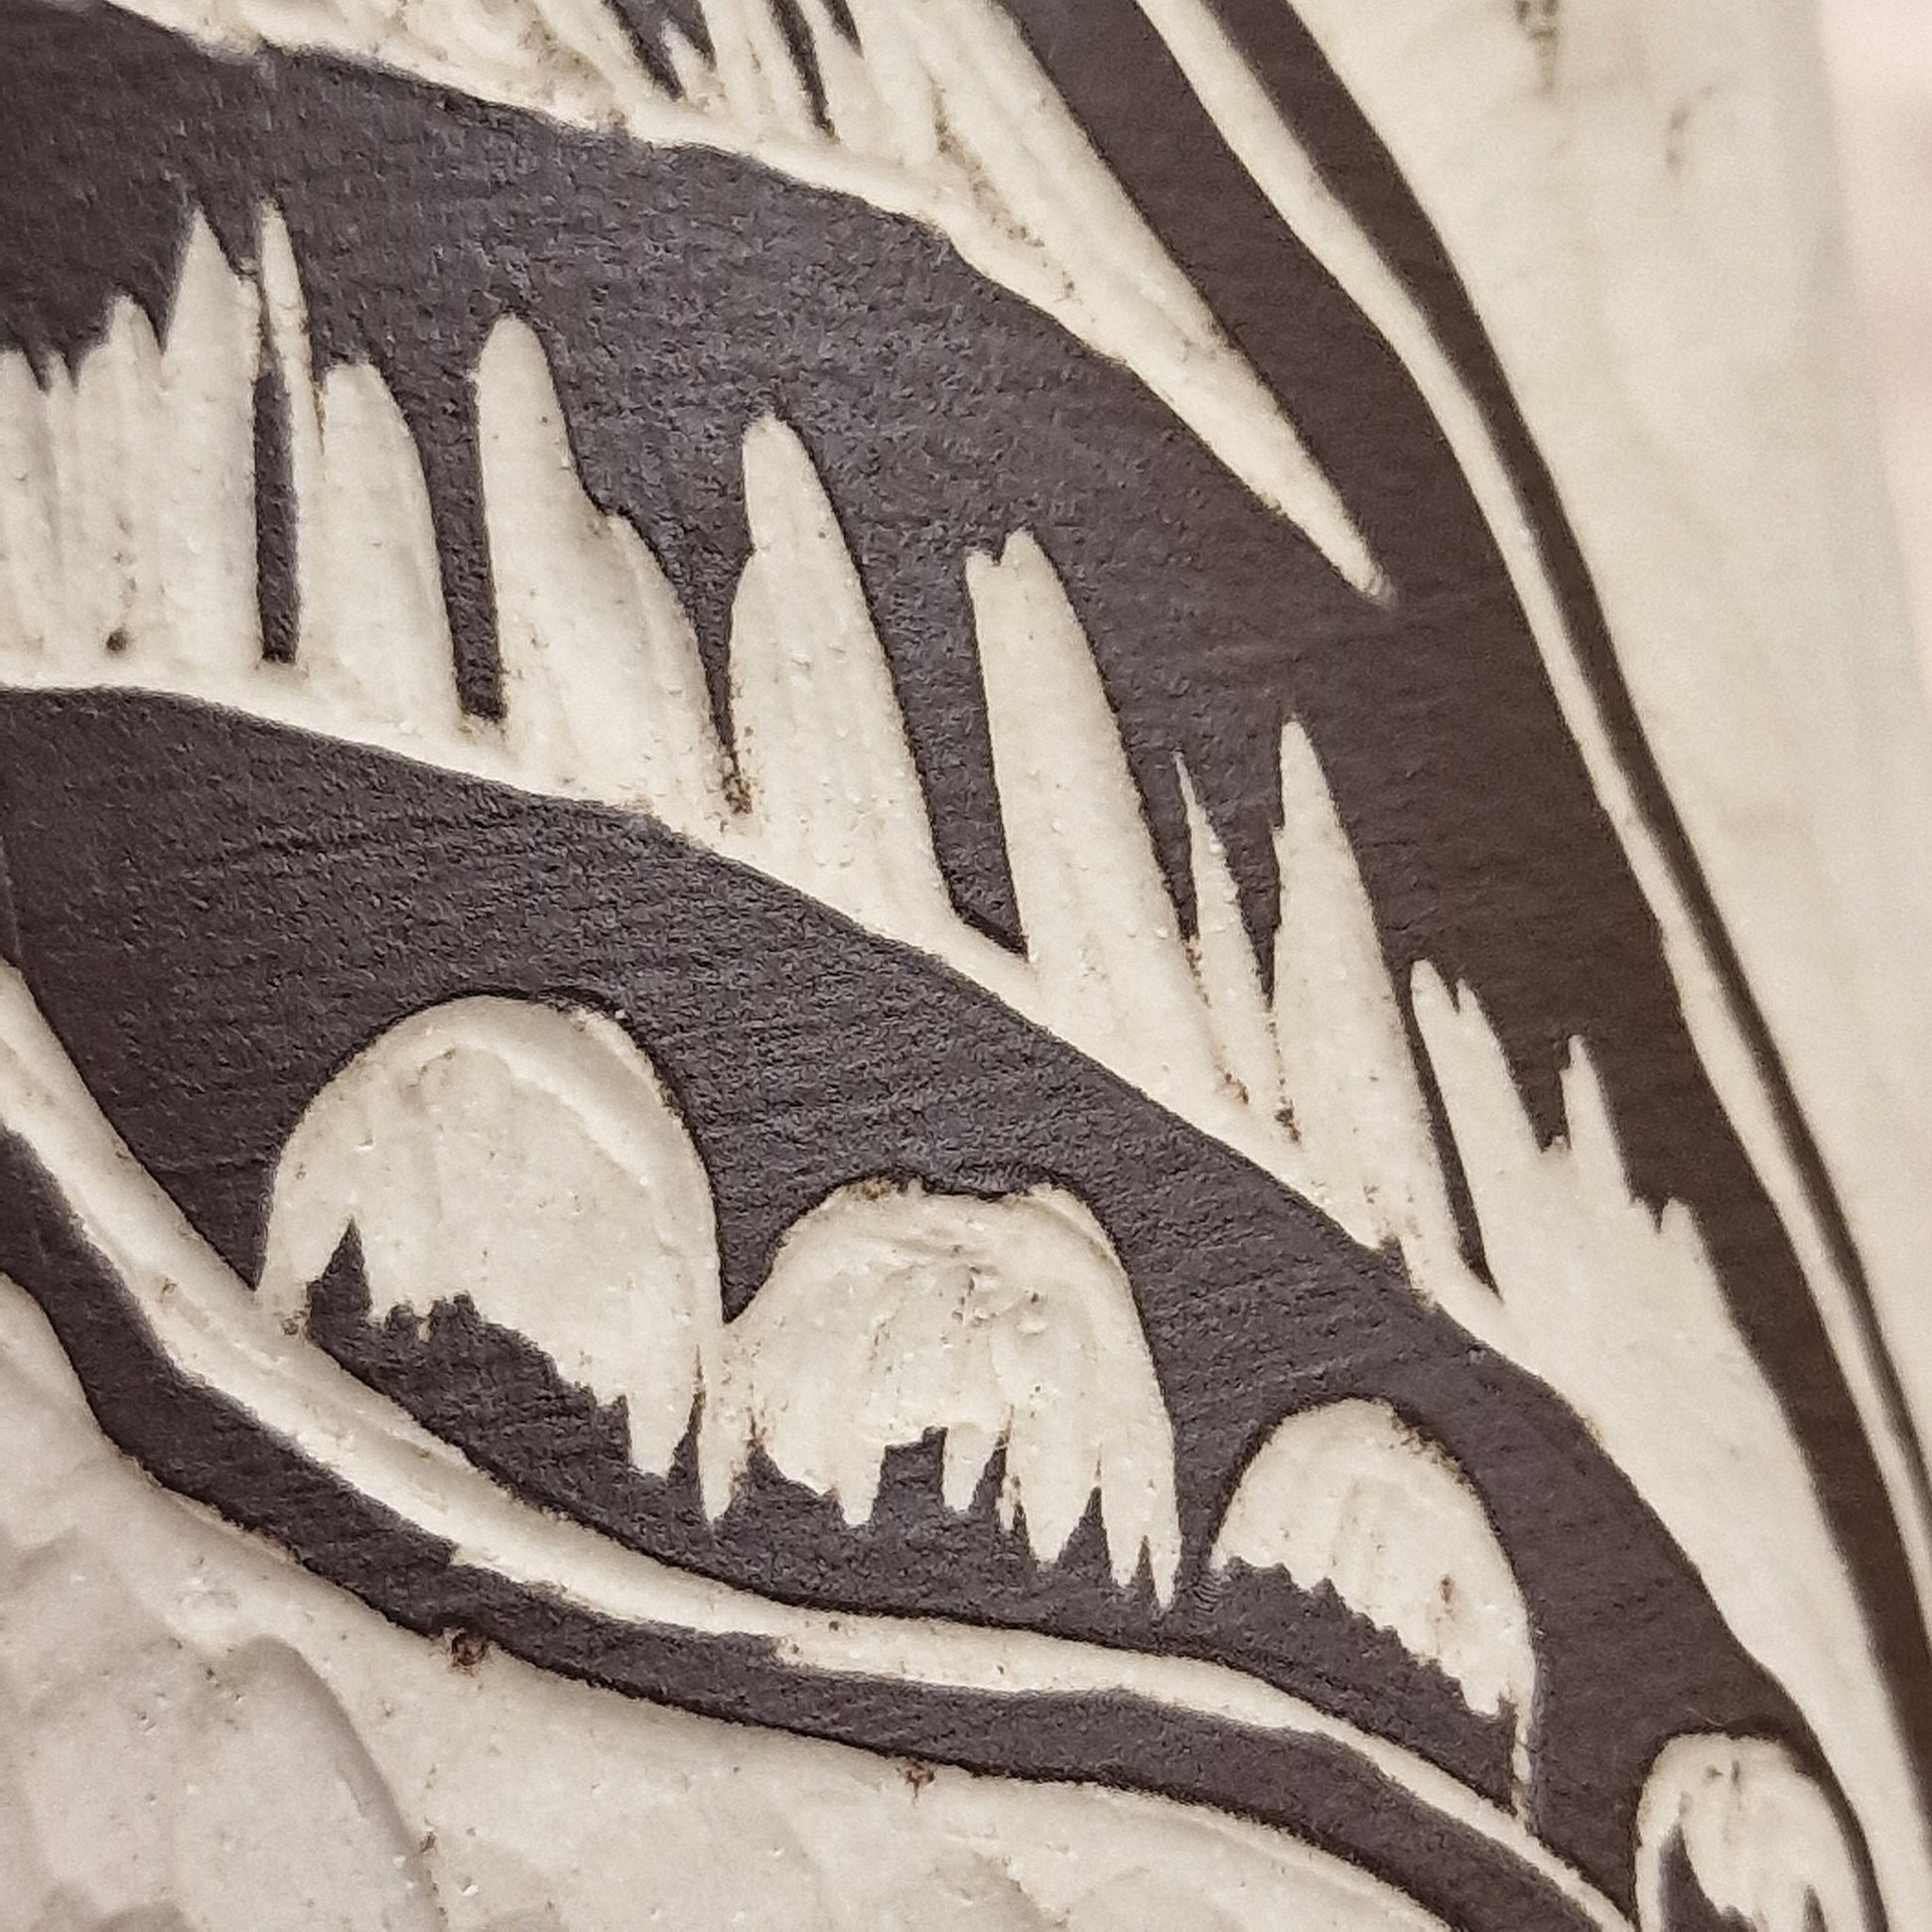 A close-up of a sgraffito product, in which a carving has been made, producing a decorative pattern on the ceramic surface